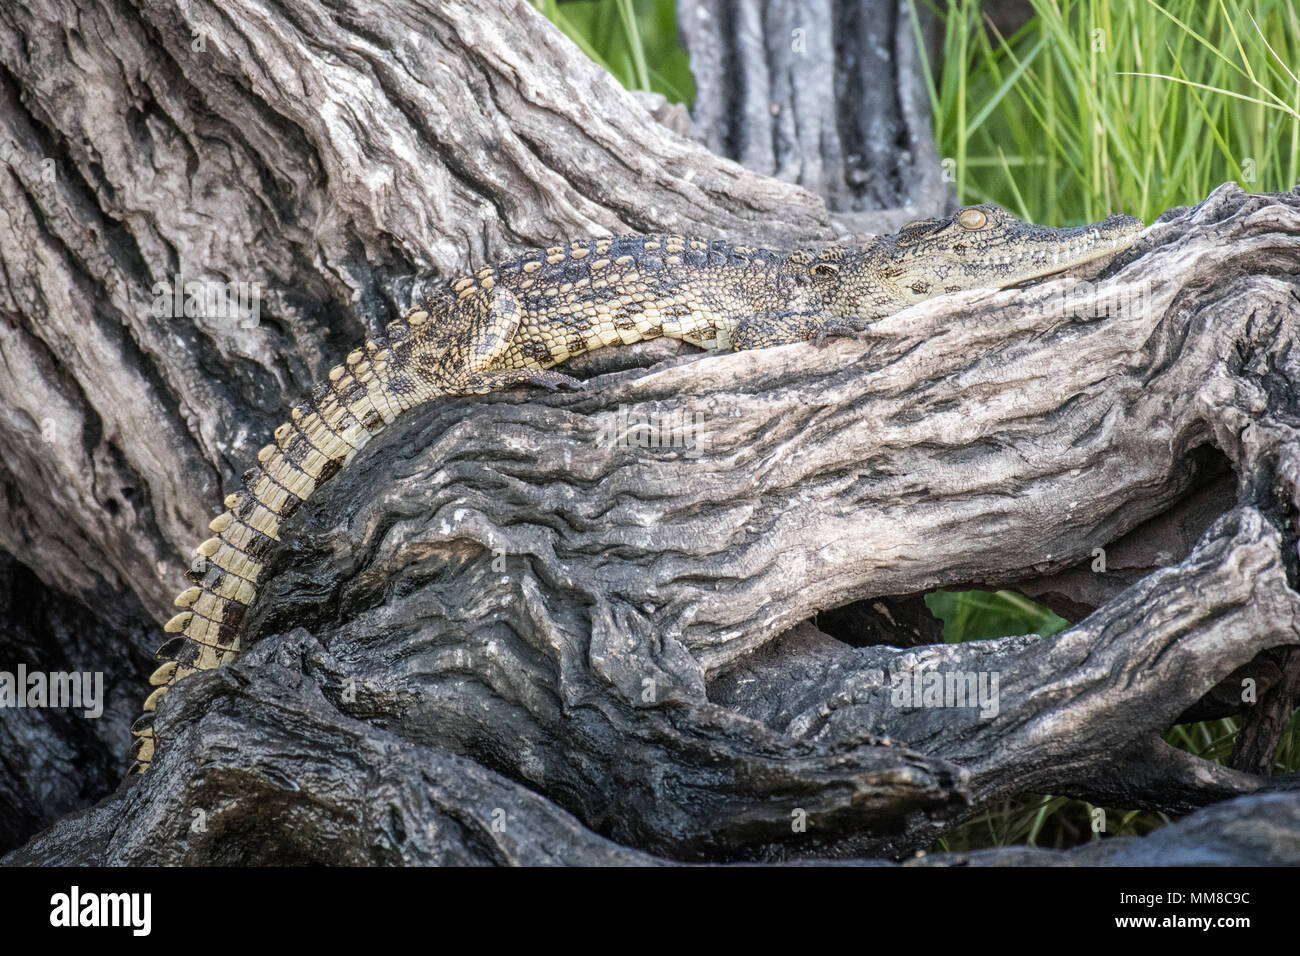 A Nile crocodile basks in the sun and stretches itself out along a tree limb. Chobe National Park - Botswana Stock Photo